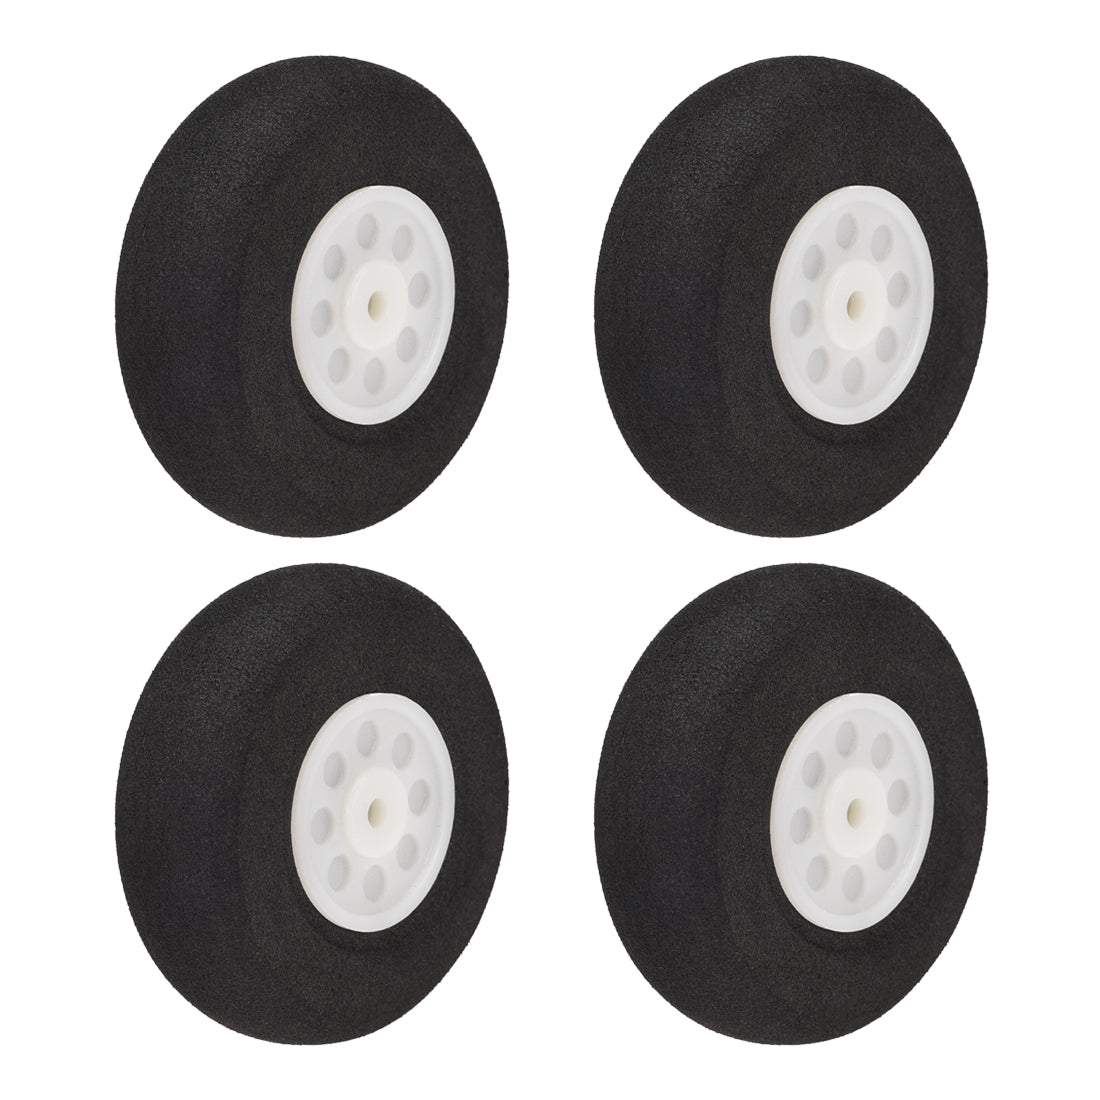 uxcell Uxcell RC Airplane Wheels - 4PCS RC Airplane Aircraft Sponge Wheels 2 inch x 0.11 inch